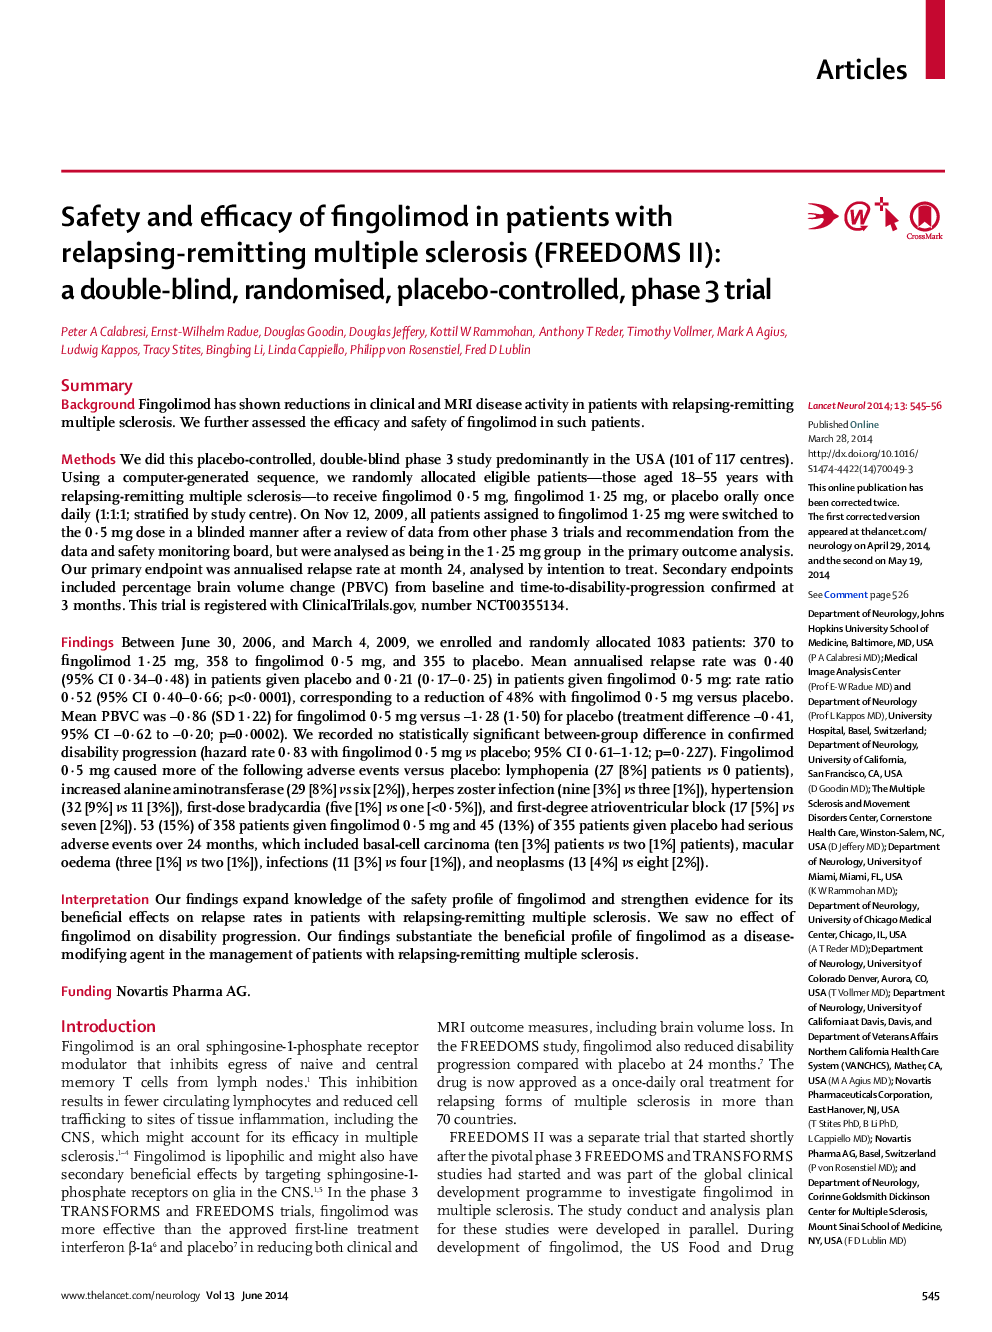 Safety and efficacy of fingolimod in patients with relapsing-remitting multiple sclerosis (FREEDOMS II): a double-blind, randomised, placebo-controlled, phase 3 trial